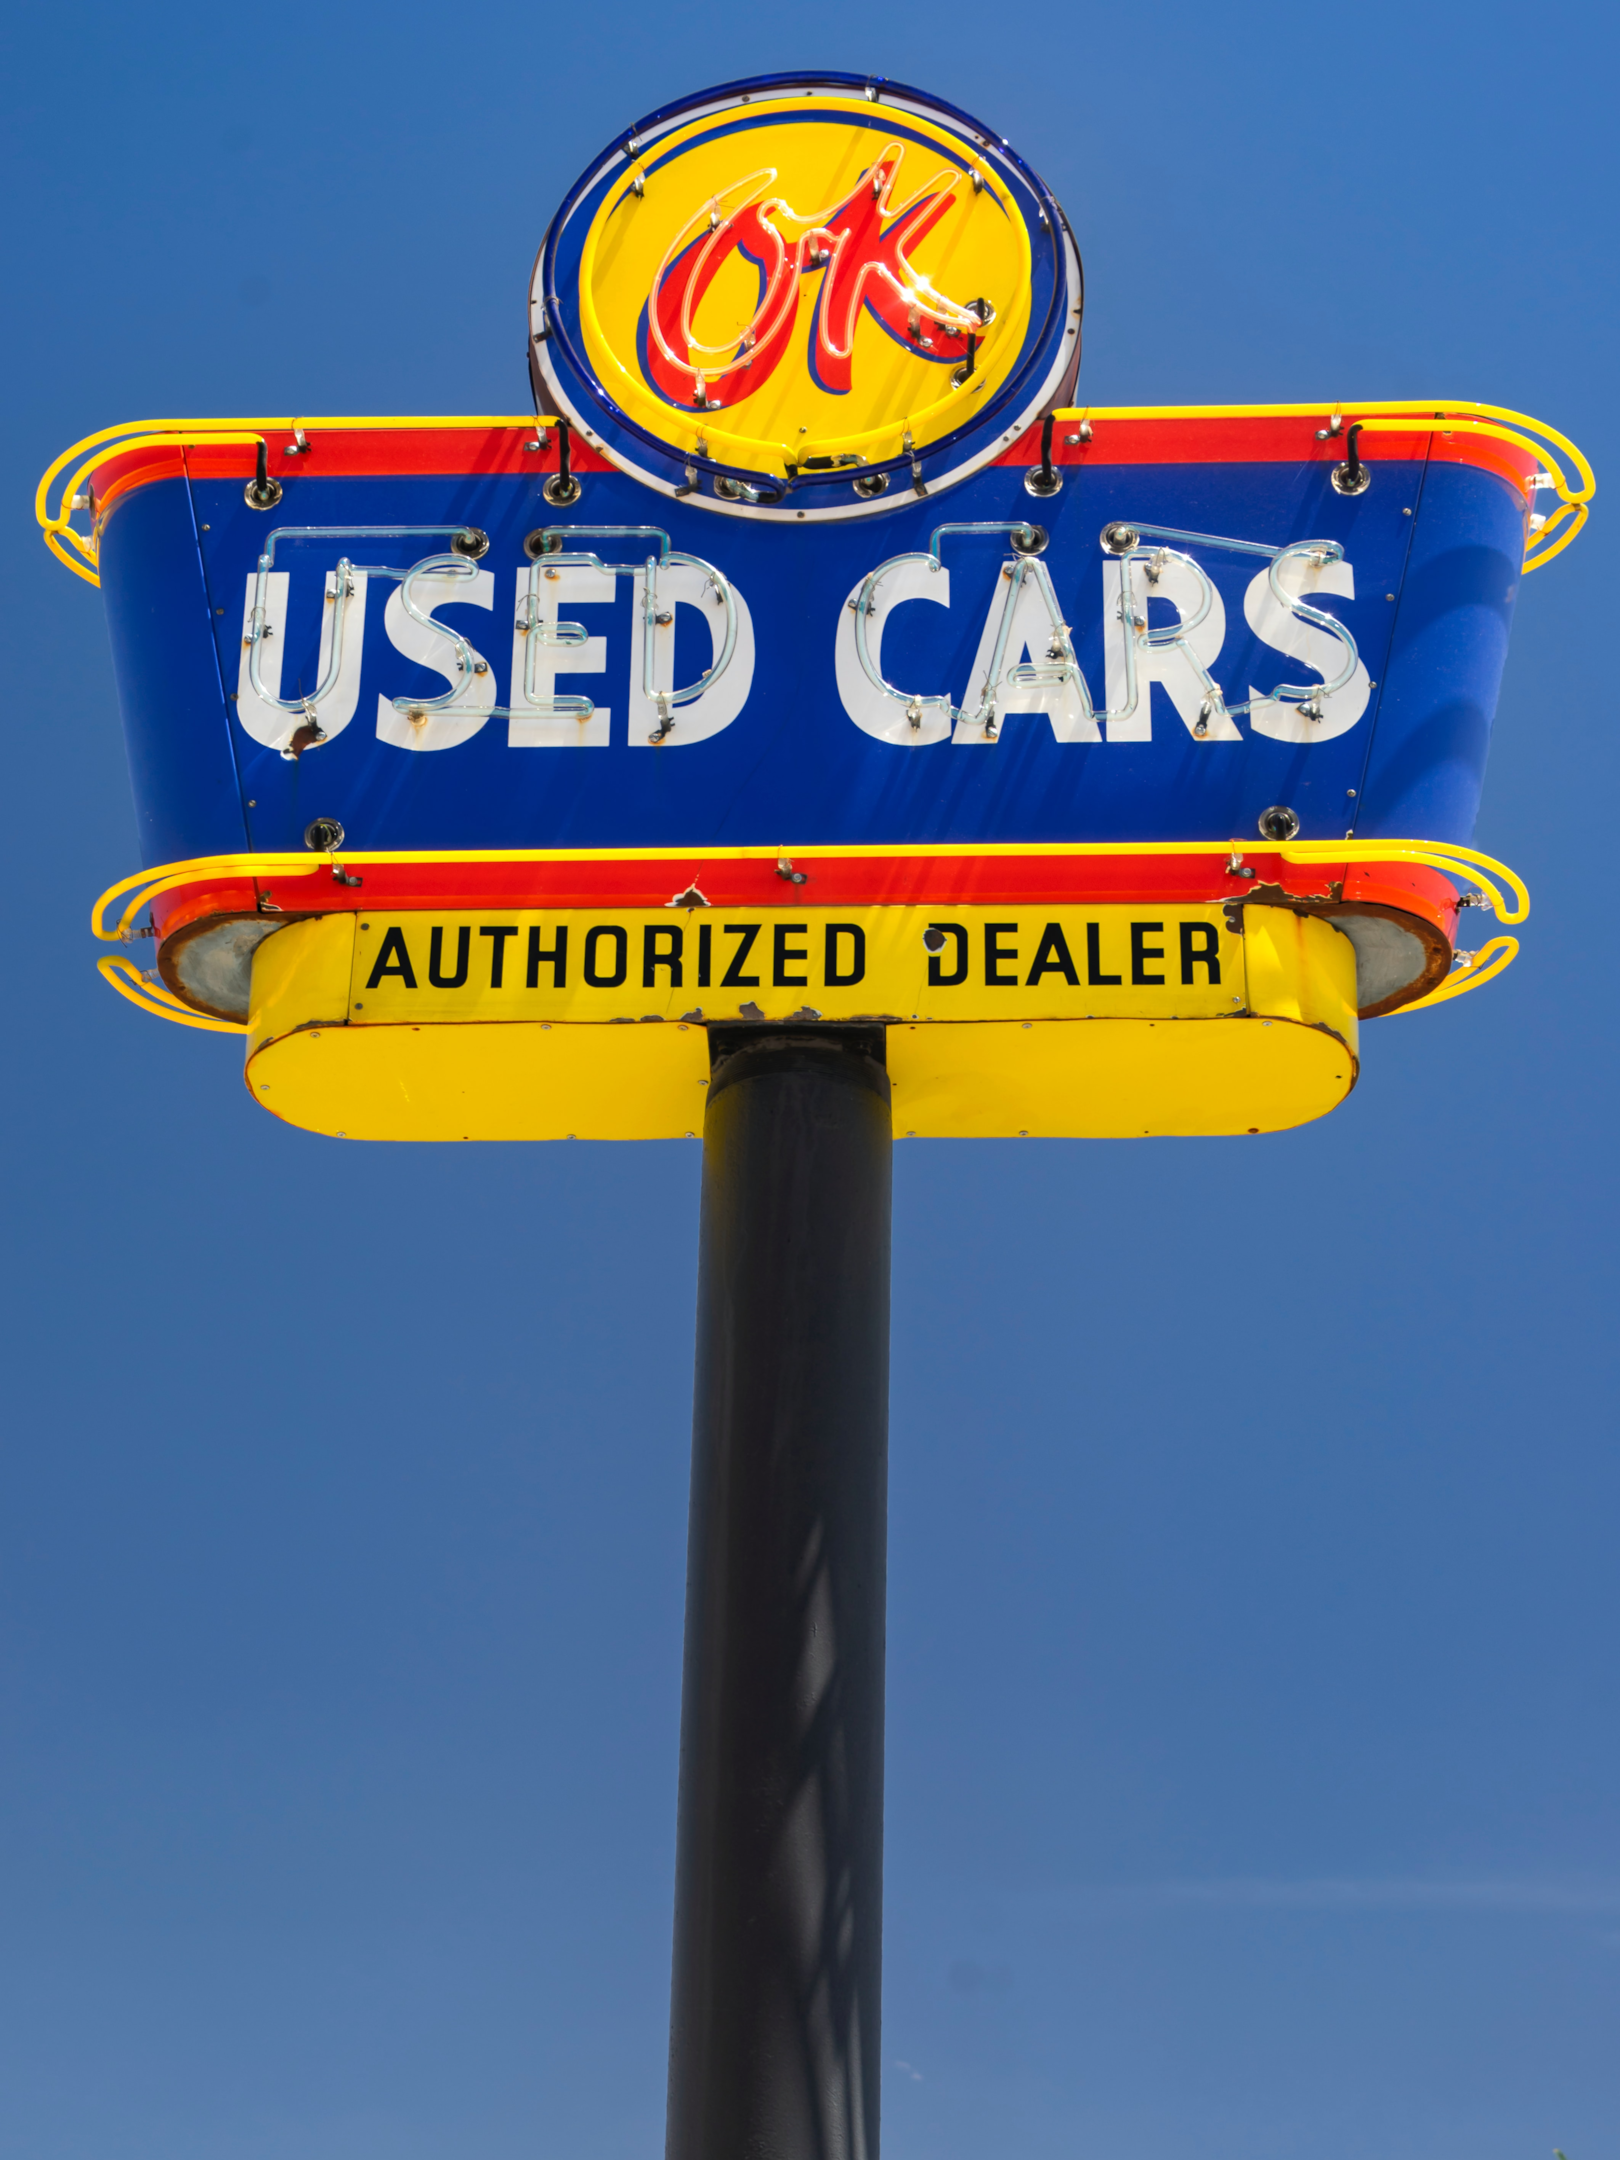 Used cars are very popular among buyers